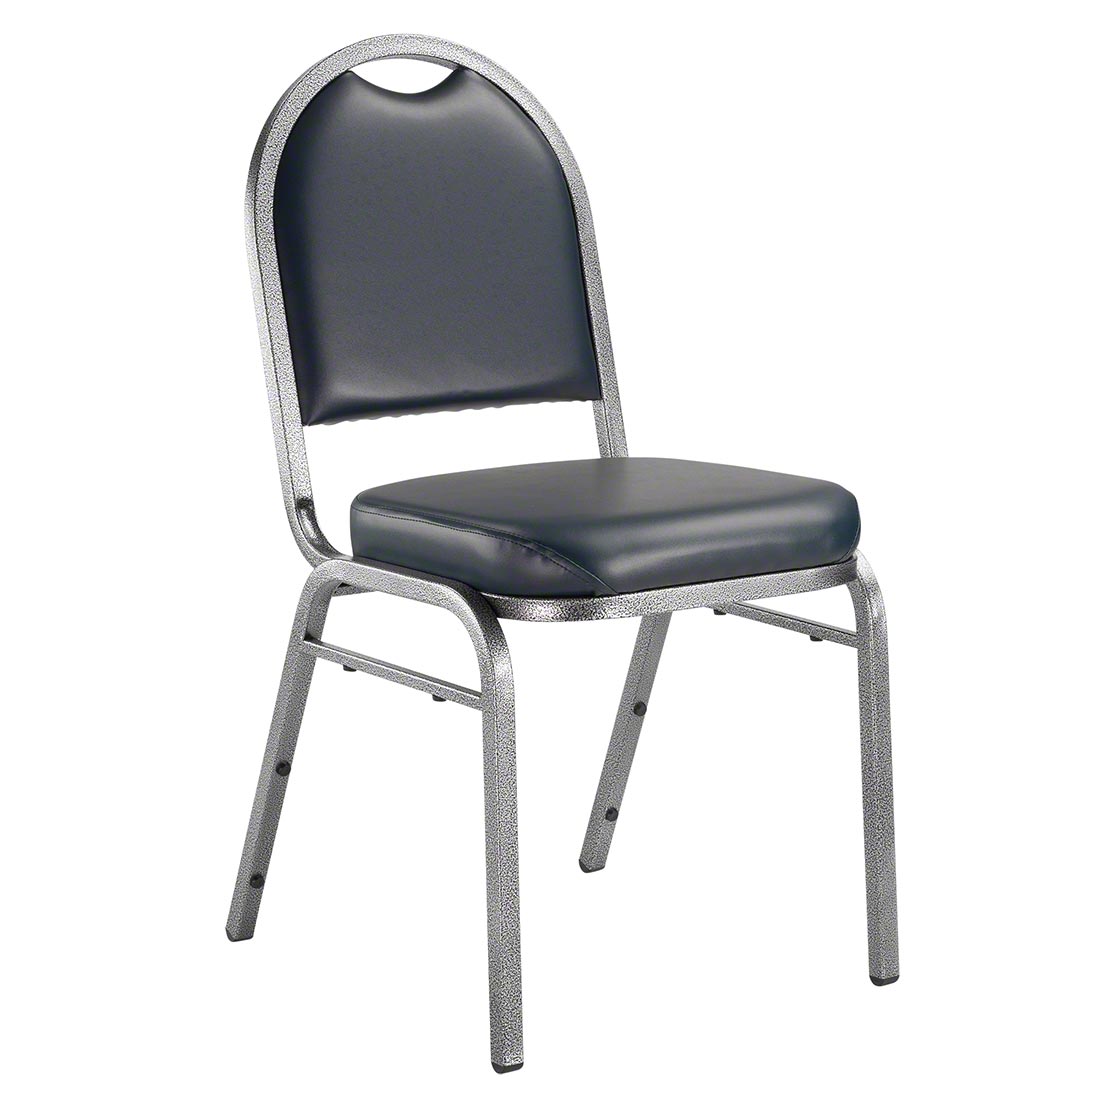 Staging Chair Bumper